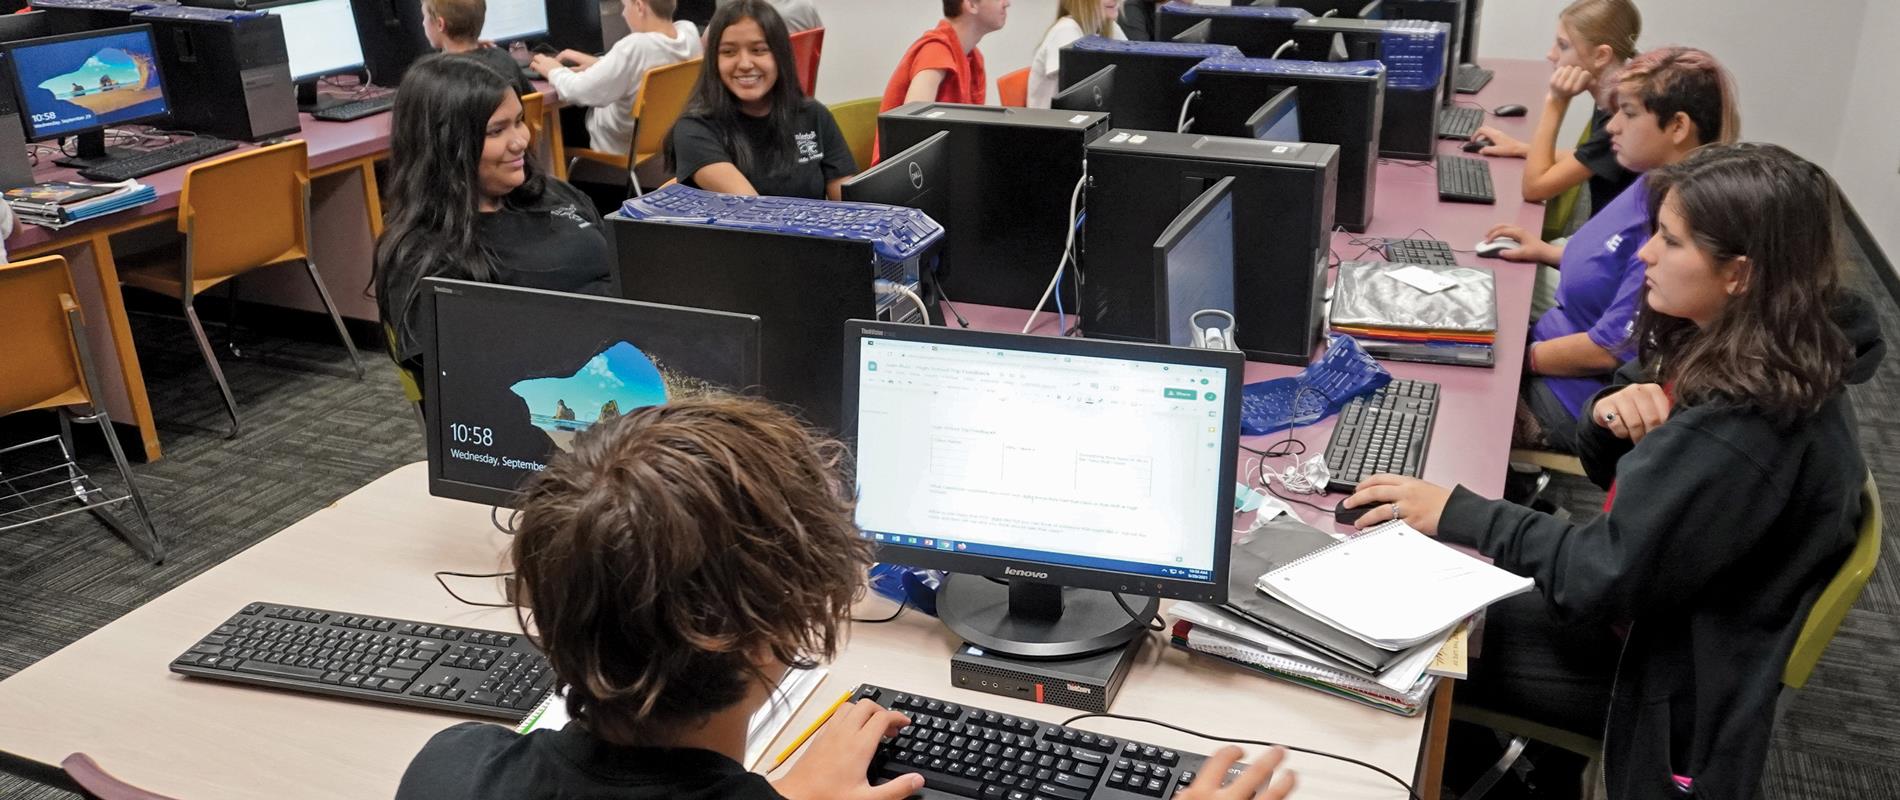 Students in the Computer Lab